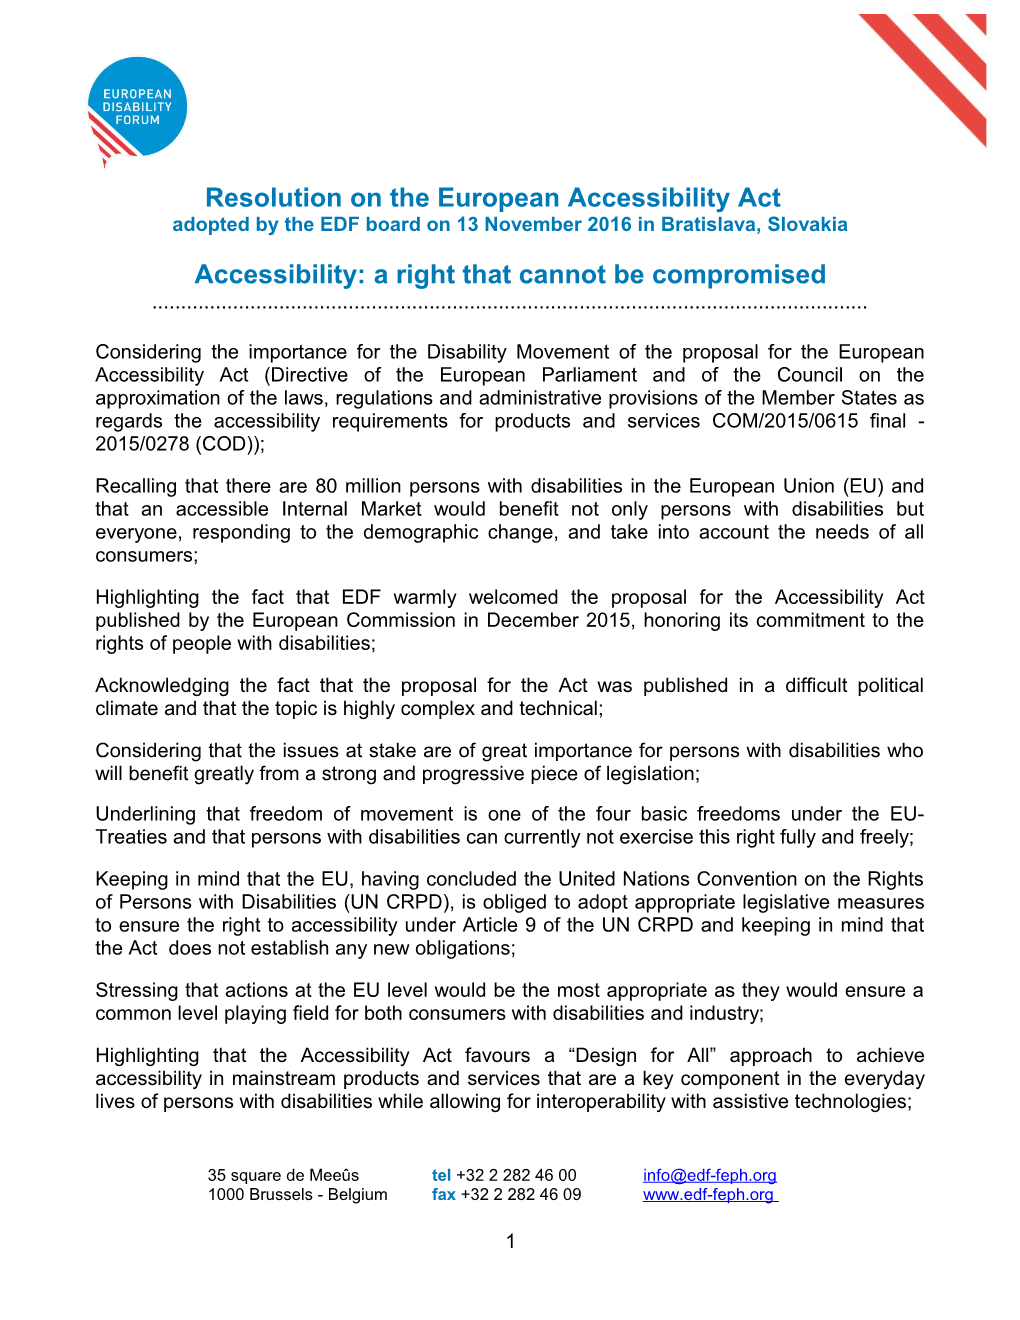 EDF Resolution of the Board on the European Accessibility Act